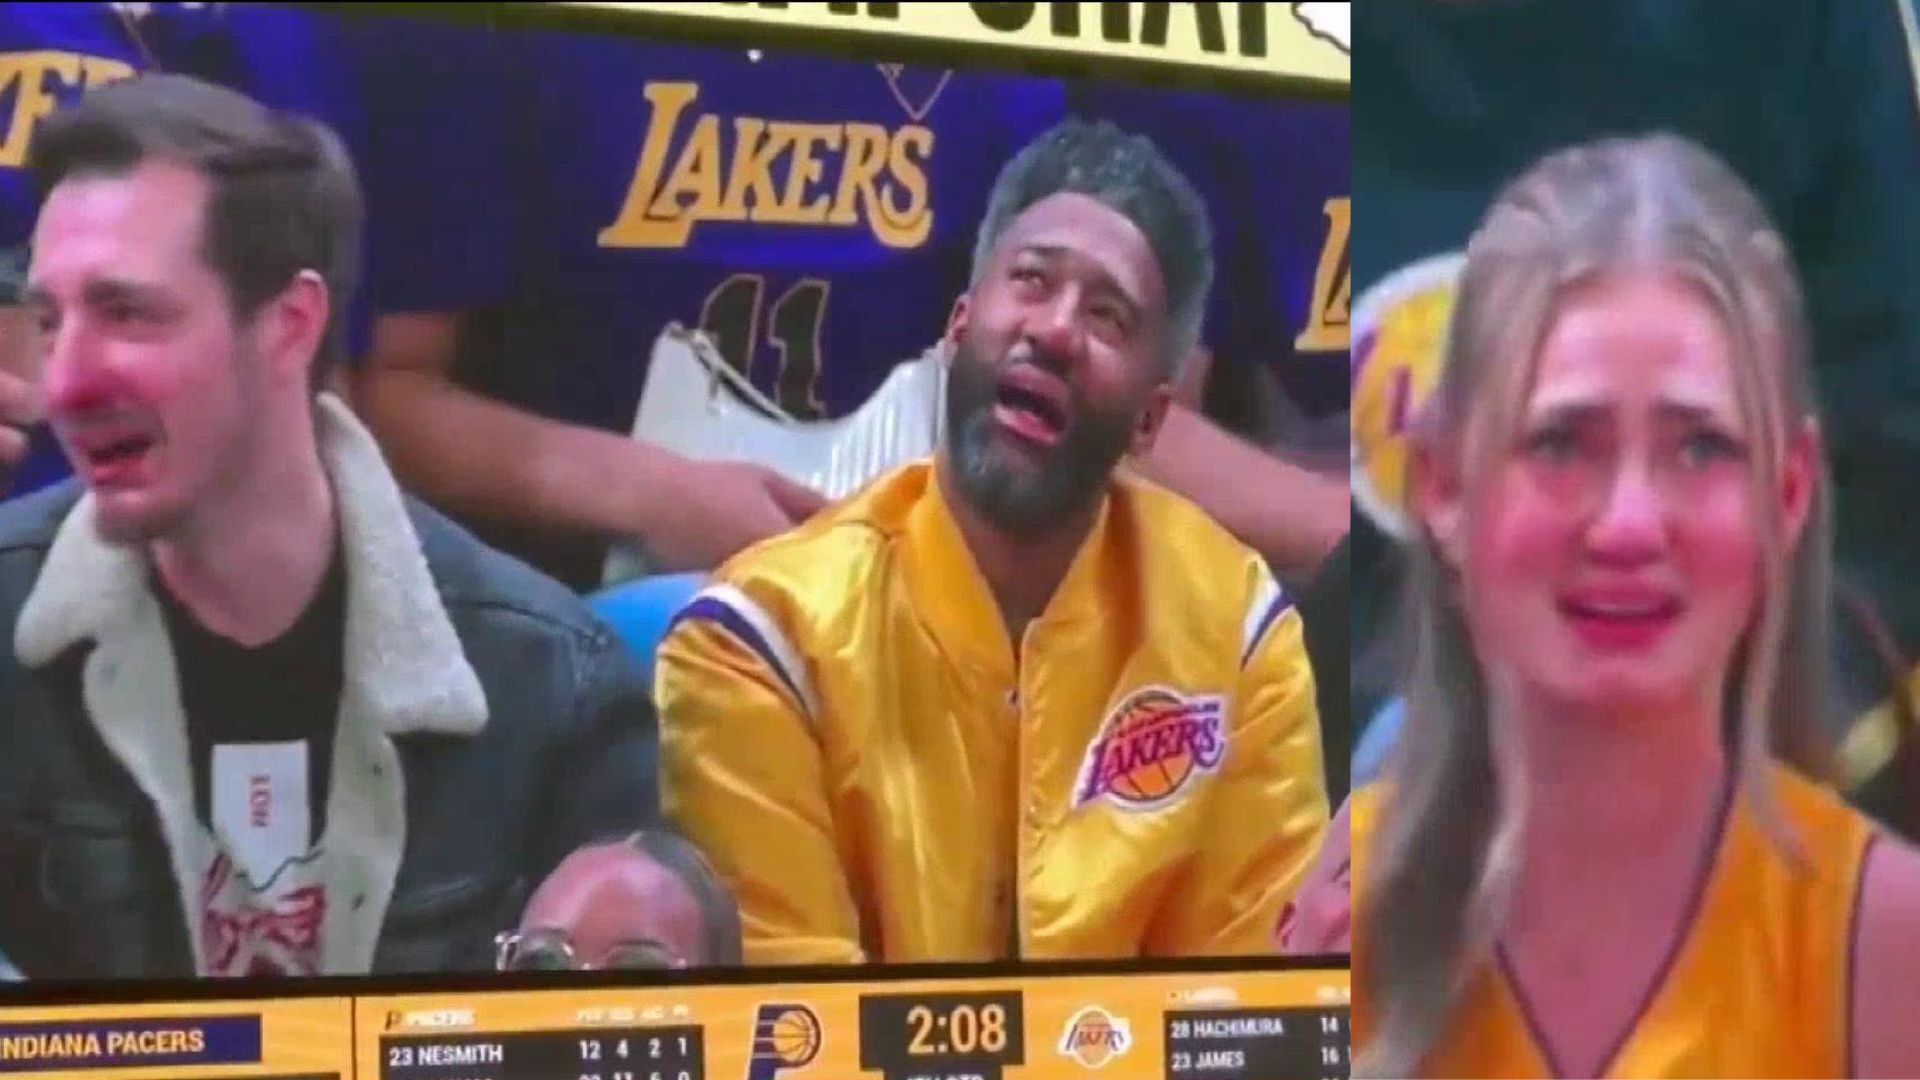 This video of the 'crying' Snapchat filter on Lakers fans is iconic